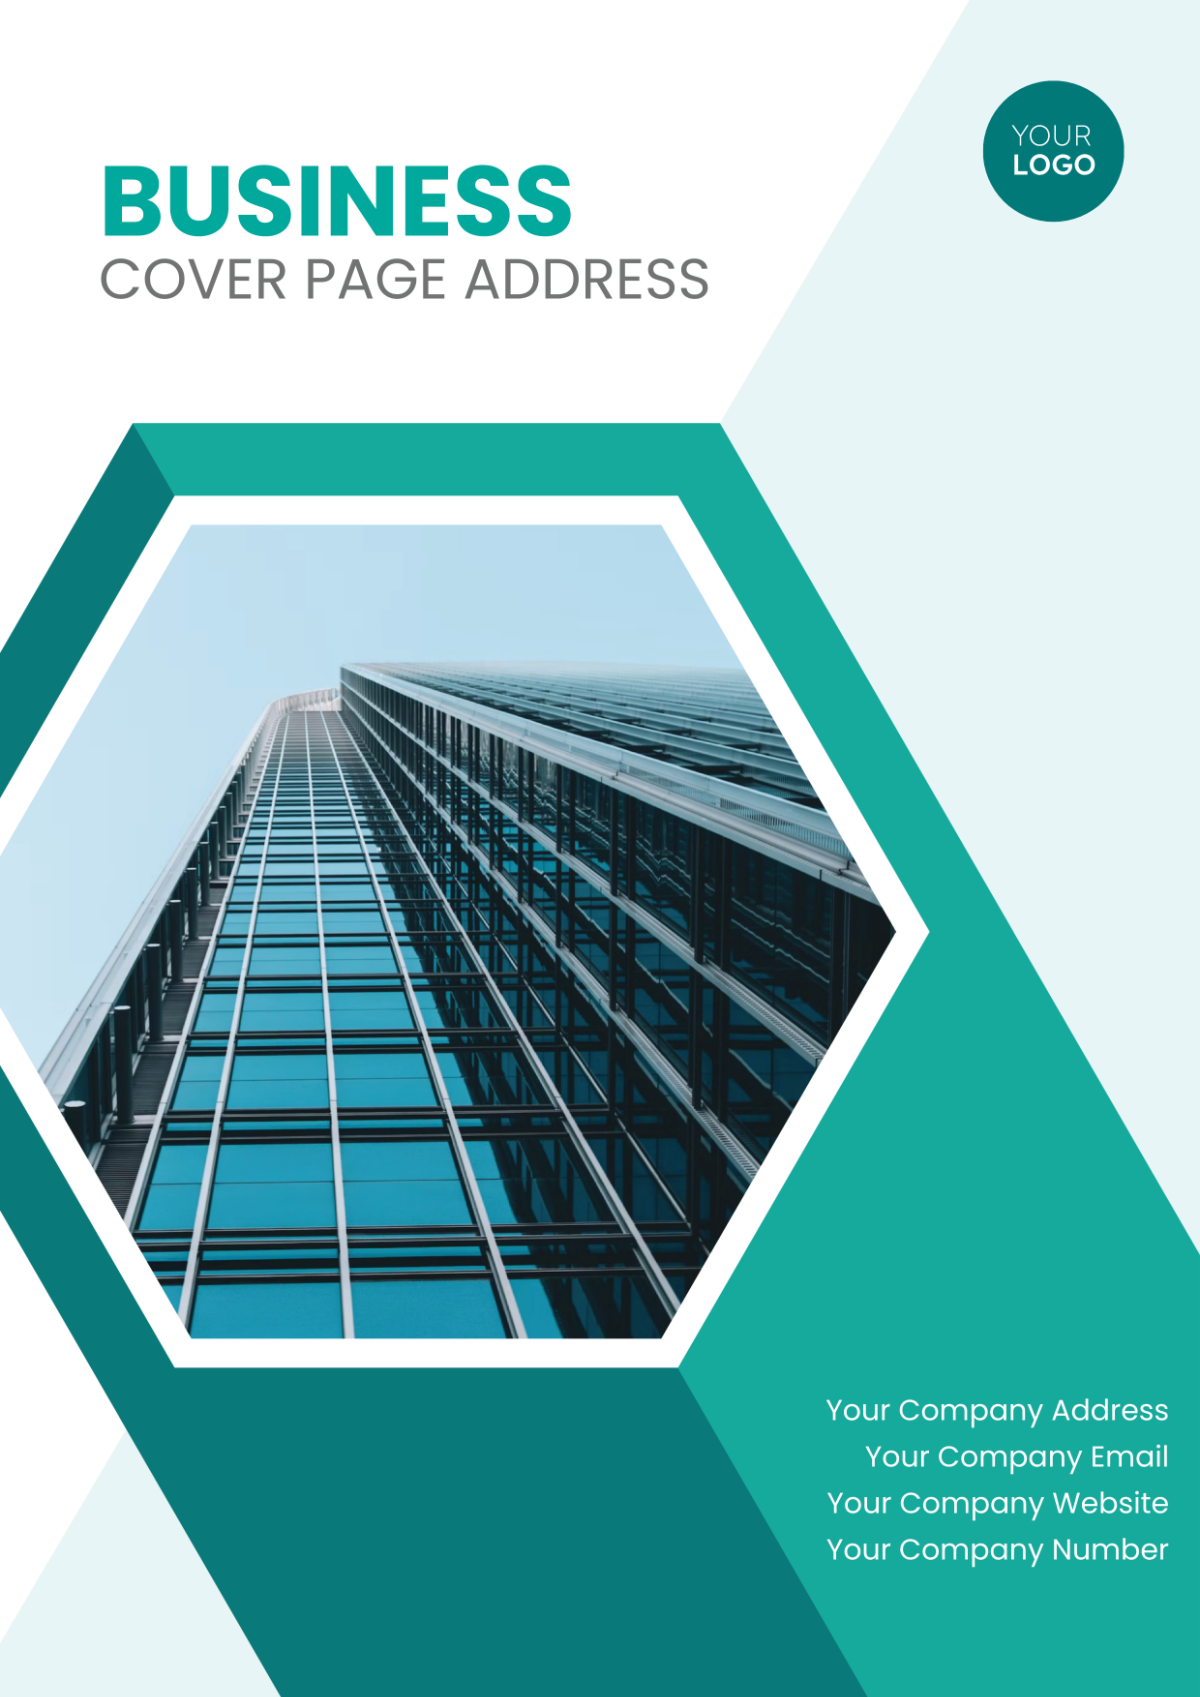 Business Cover Page Address